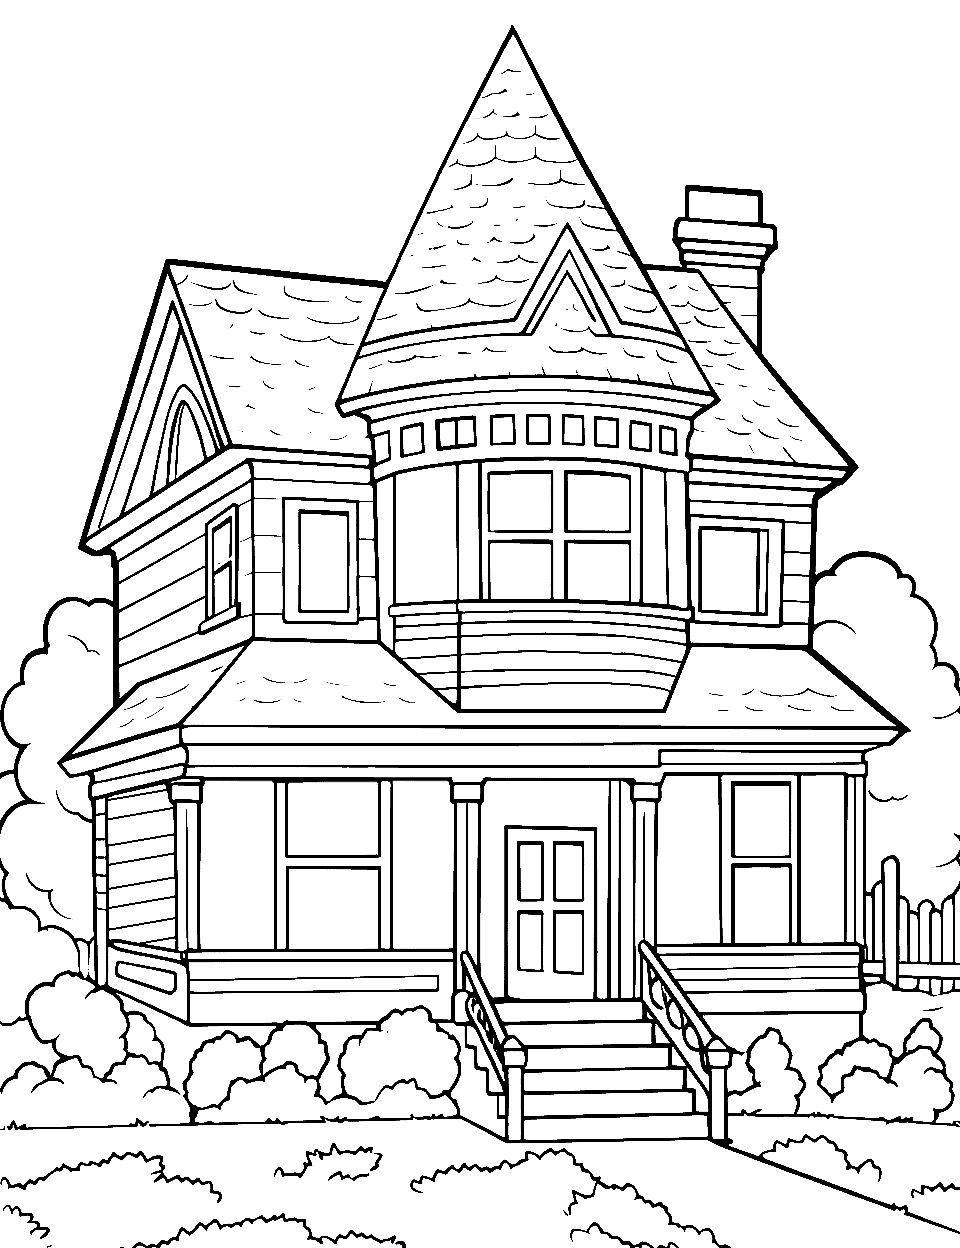 Magnificent Victorian Era Coloring Page - A detailed Victorian house ready to be colored.